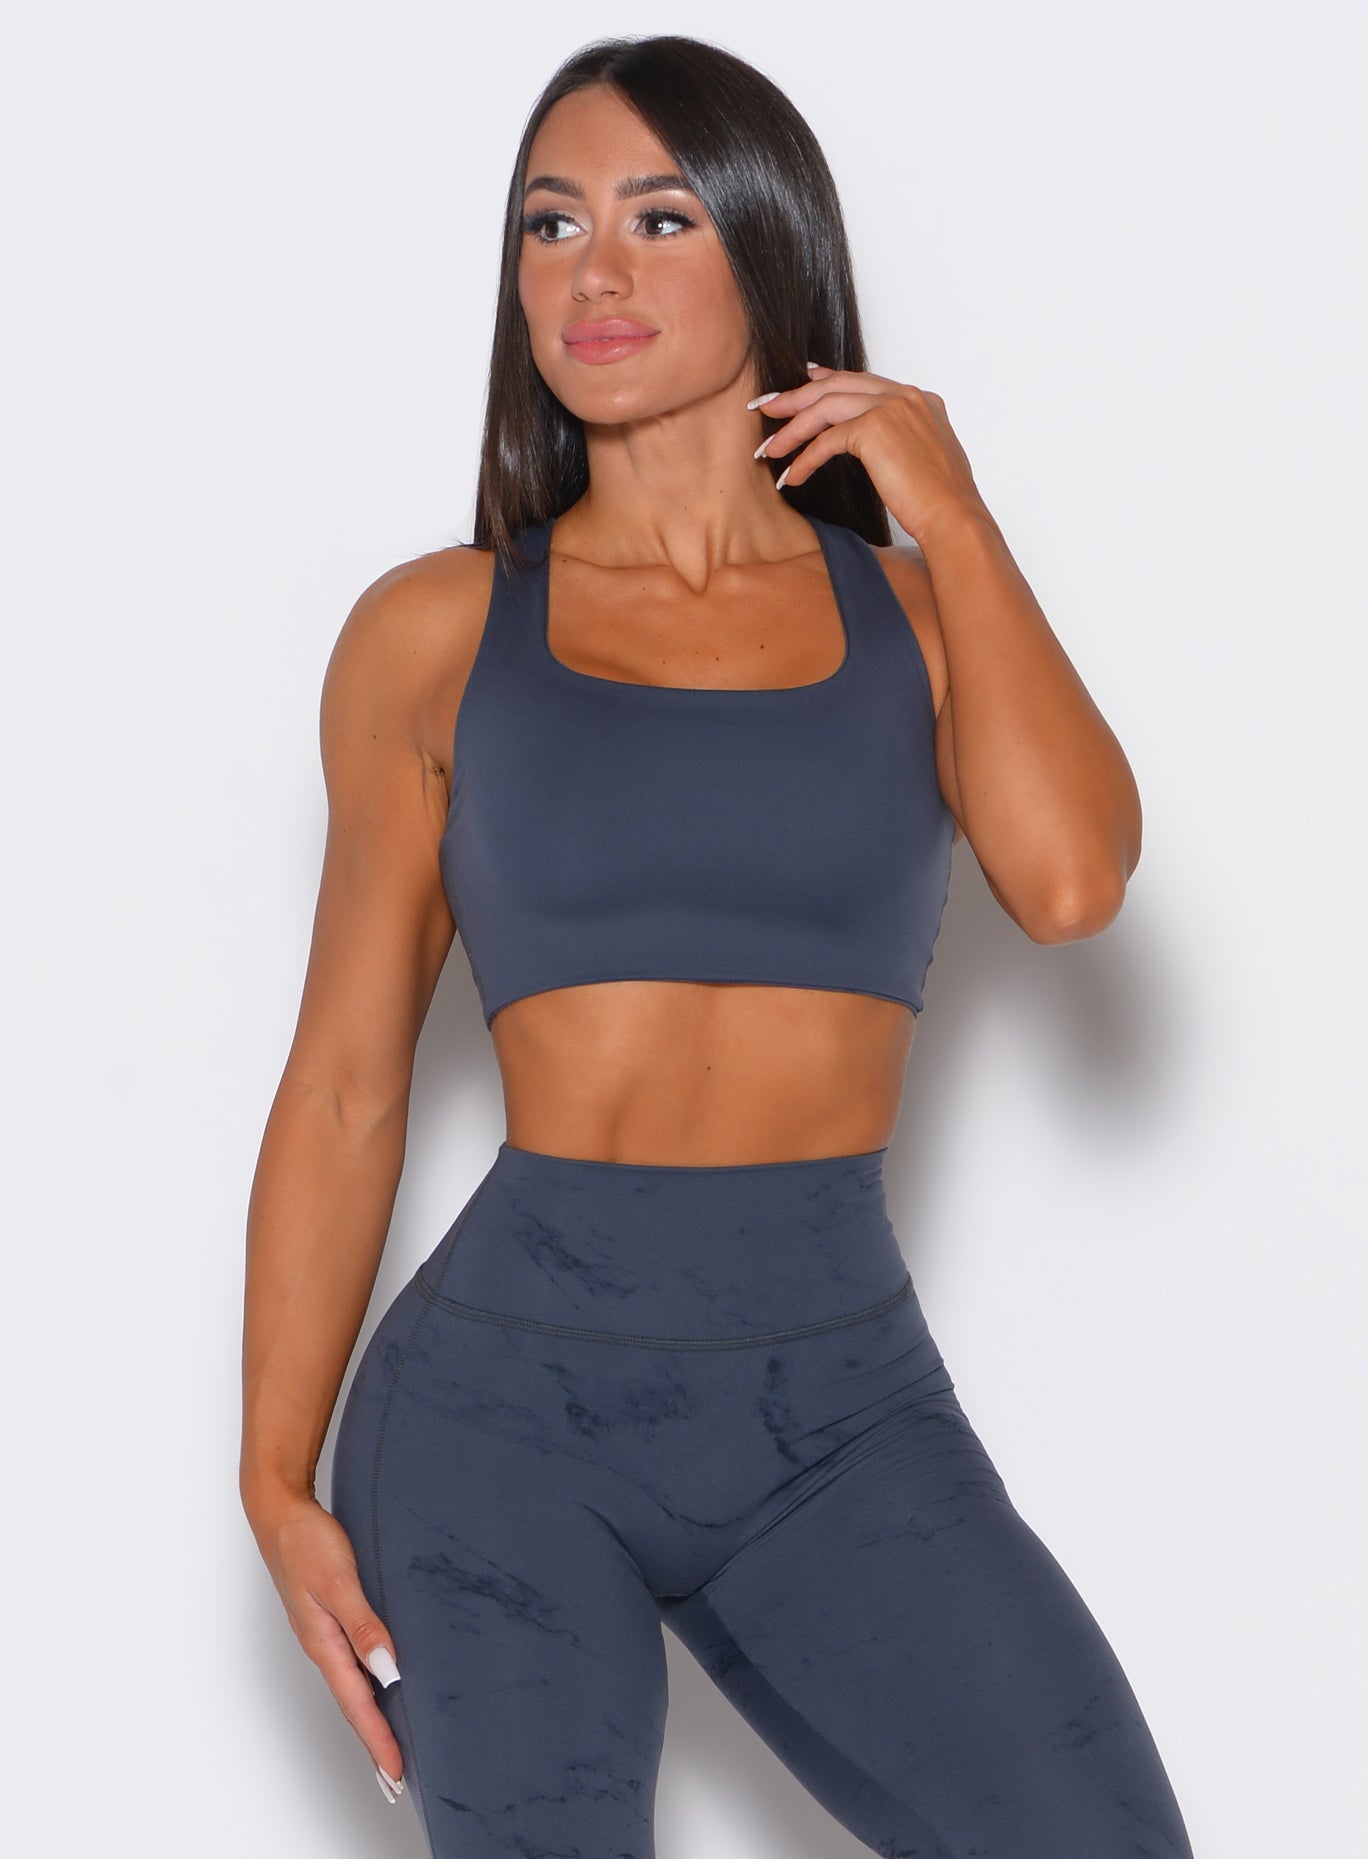 Front profile view of our model wearing the Square Neck Bra in Thunder Gray color along with a matching leggings